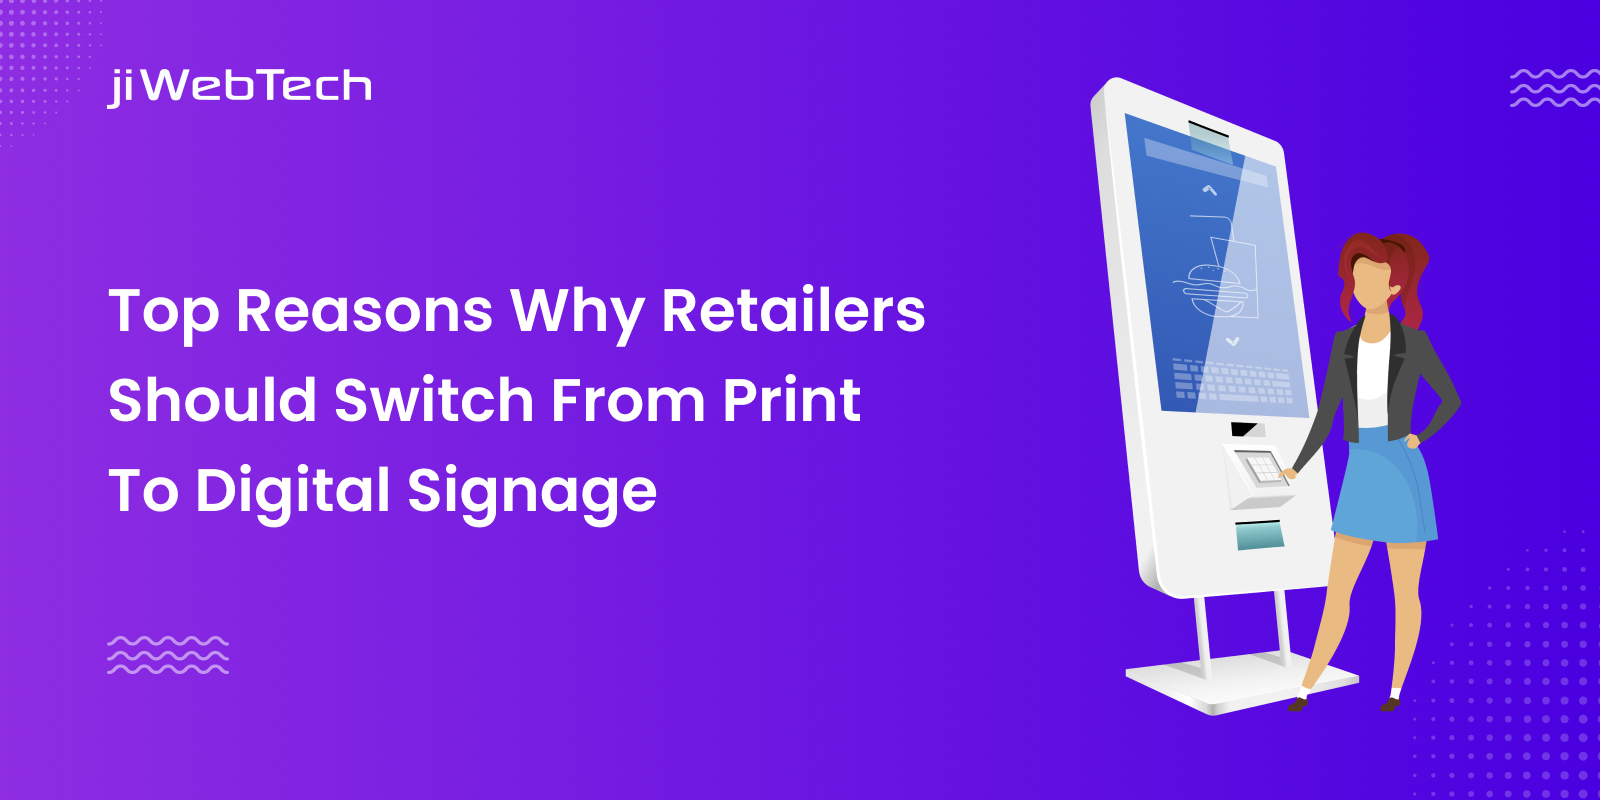 Top Reasons Why Retailers Should Switch From Print To Digital Signage